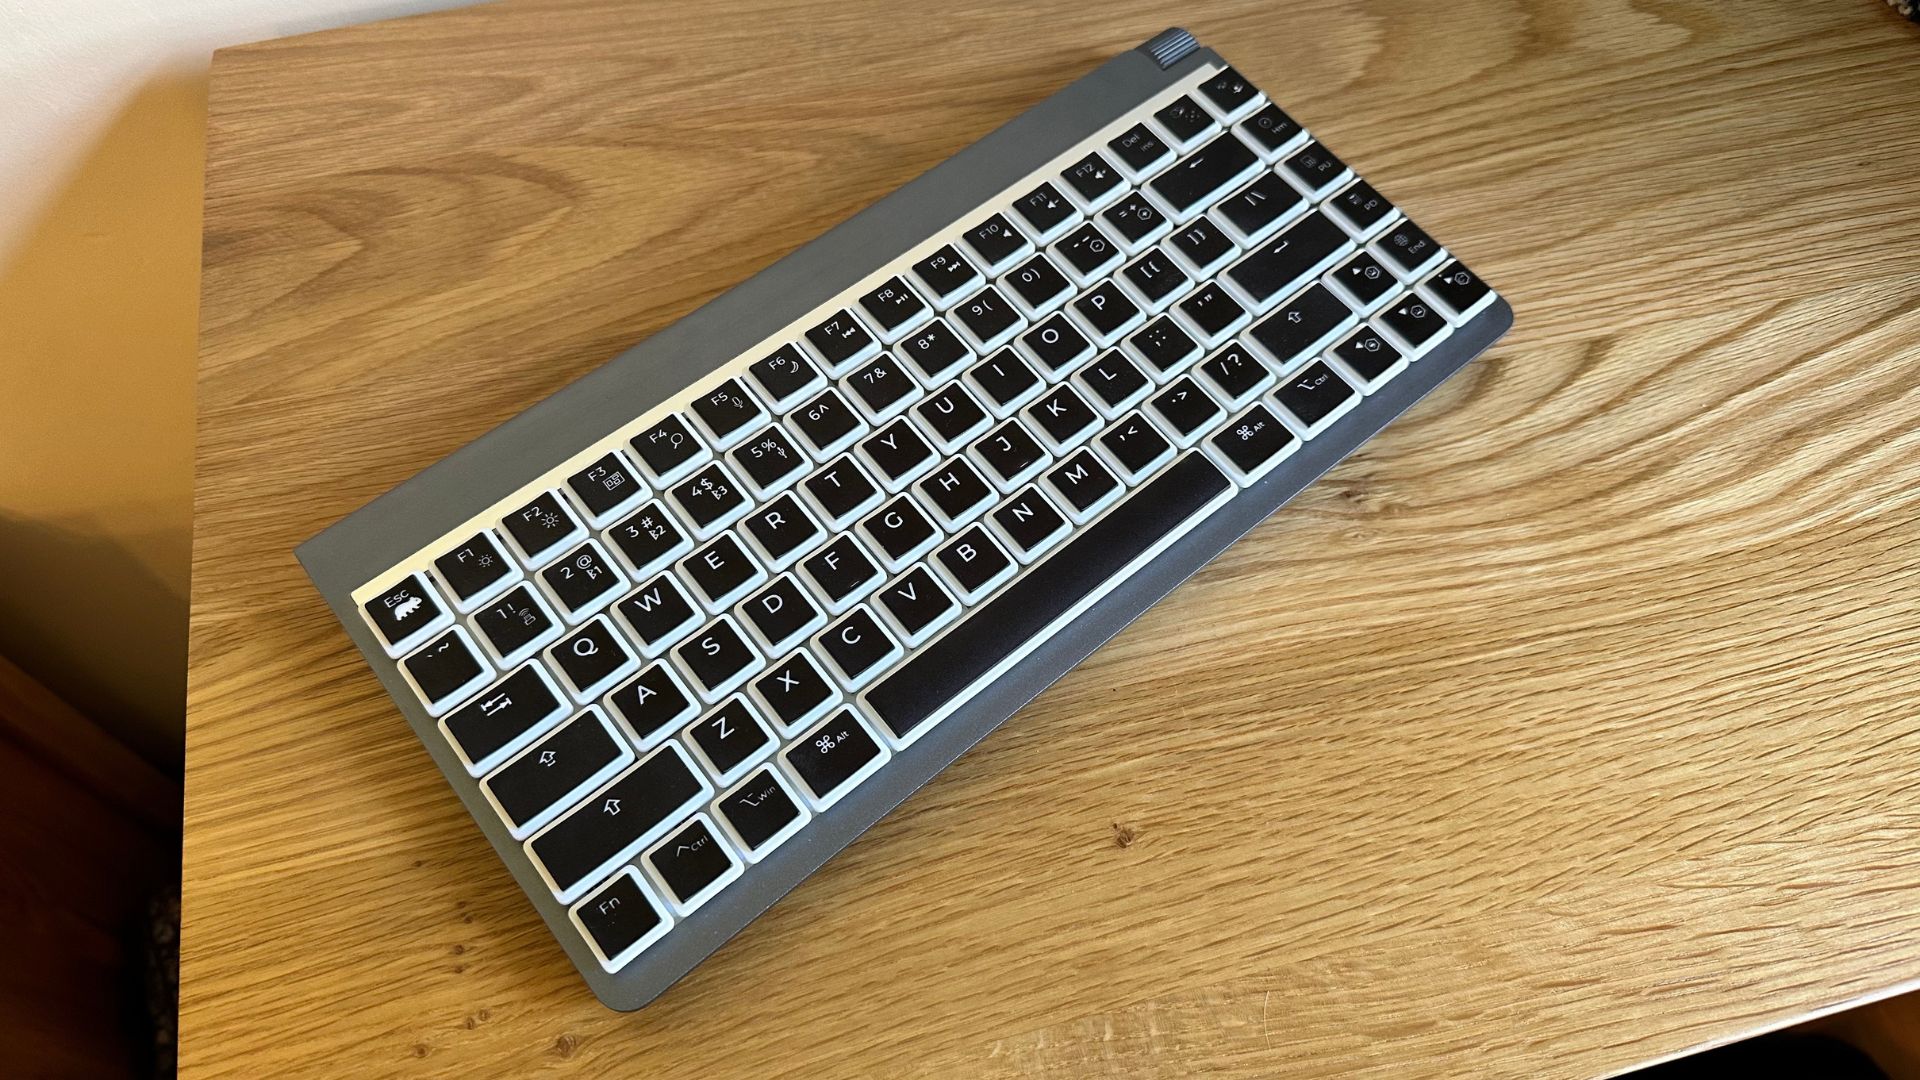 The Wombat Coleus mechanical keyboard on a wooden surface